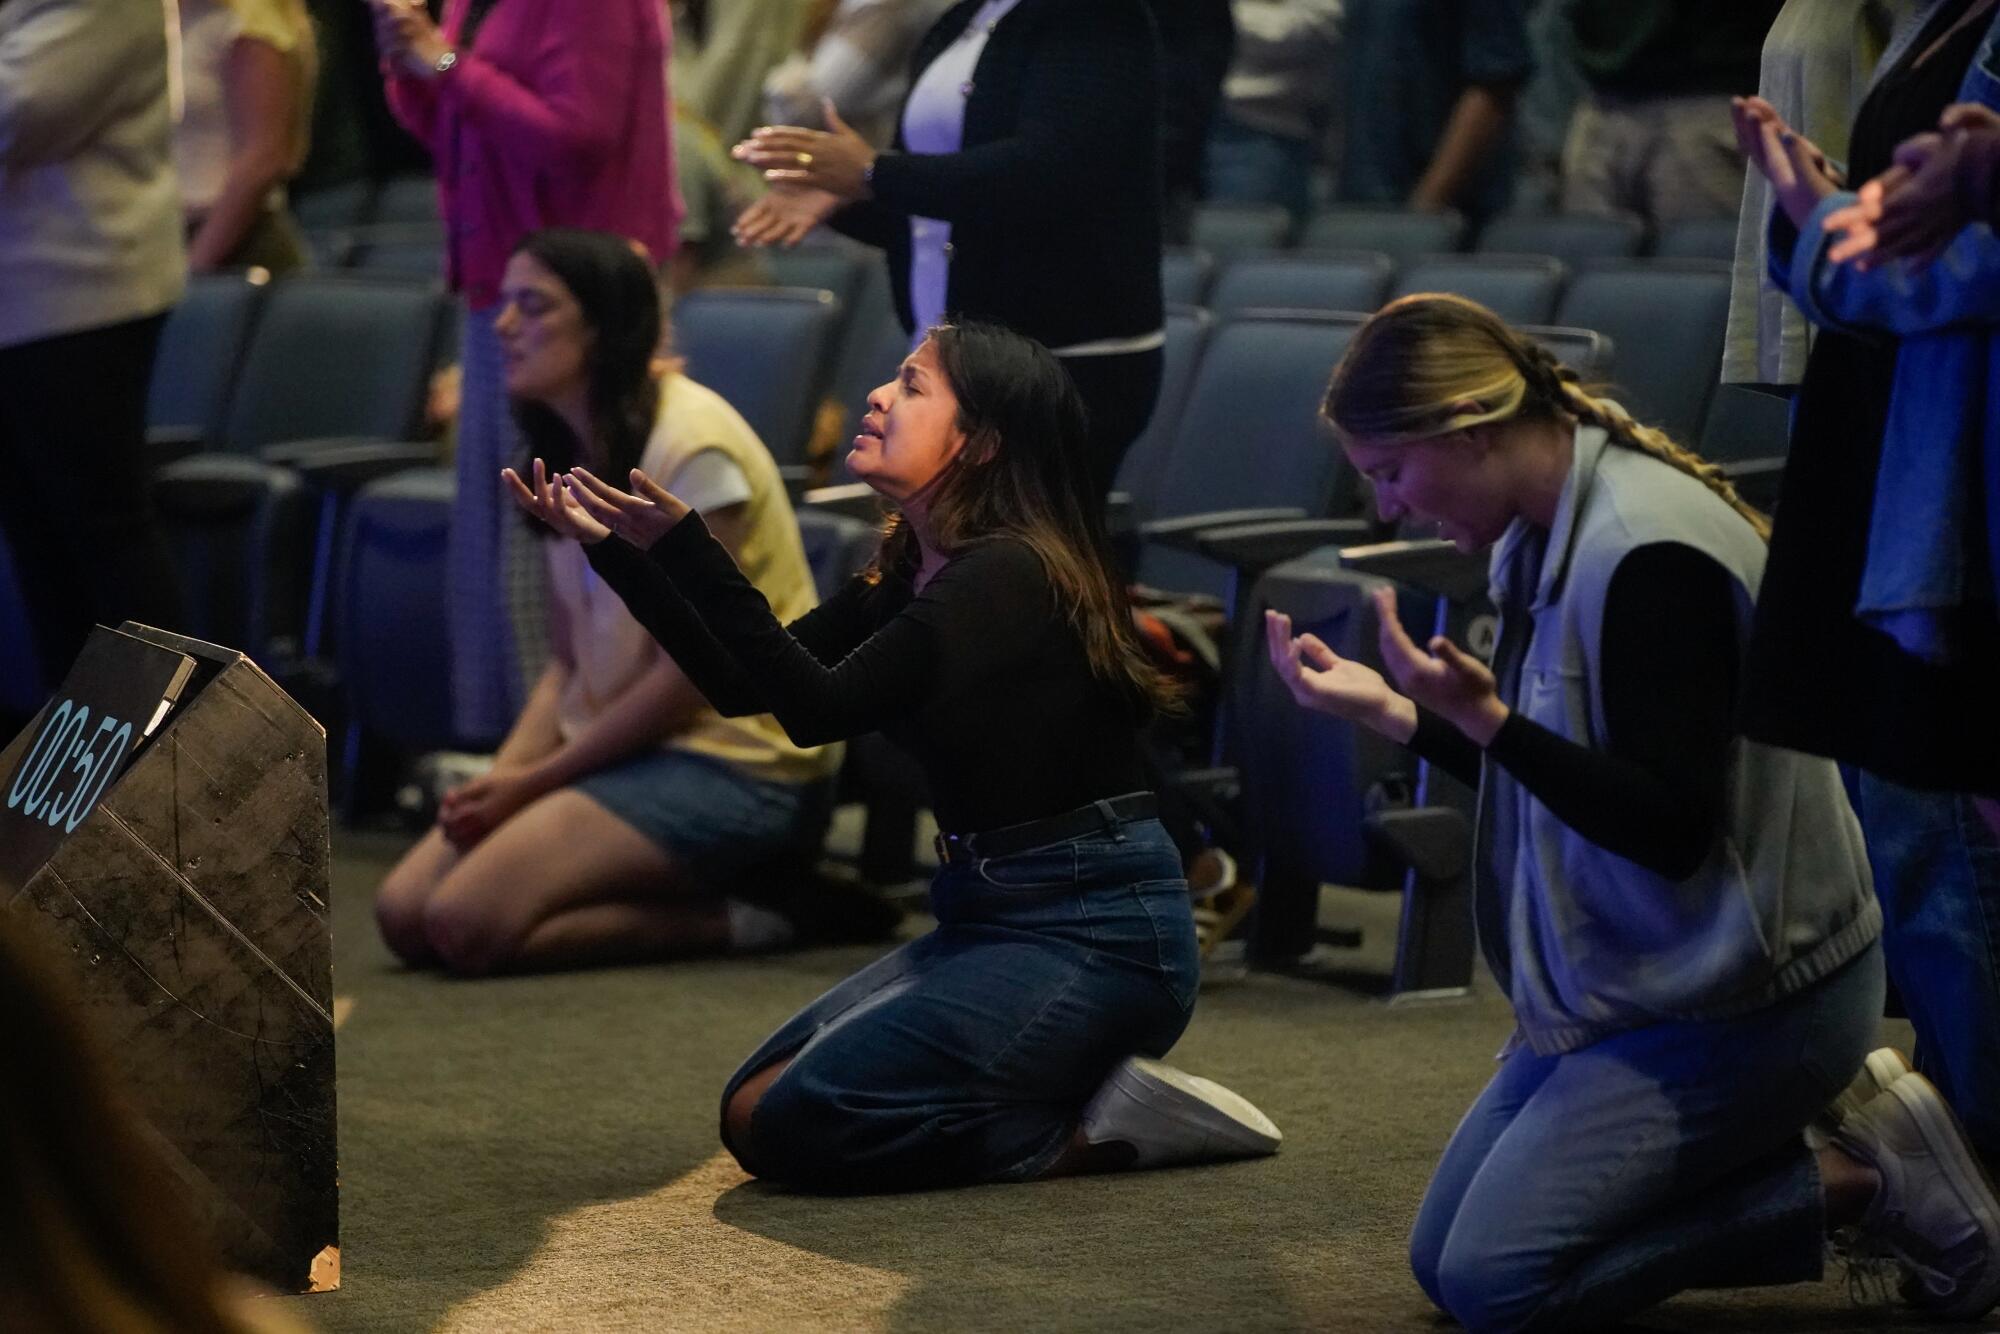 Several worshipers kneel in prayer, their hands outstretched, on a carpeted chapel floor.